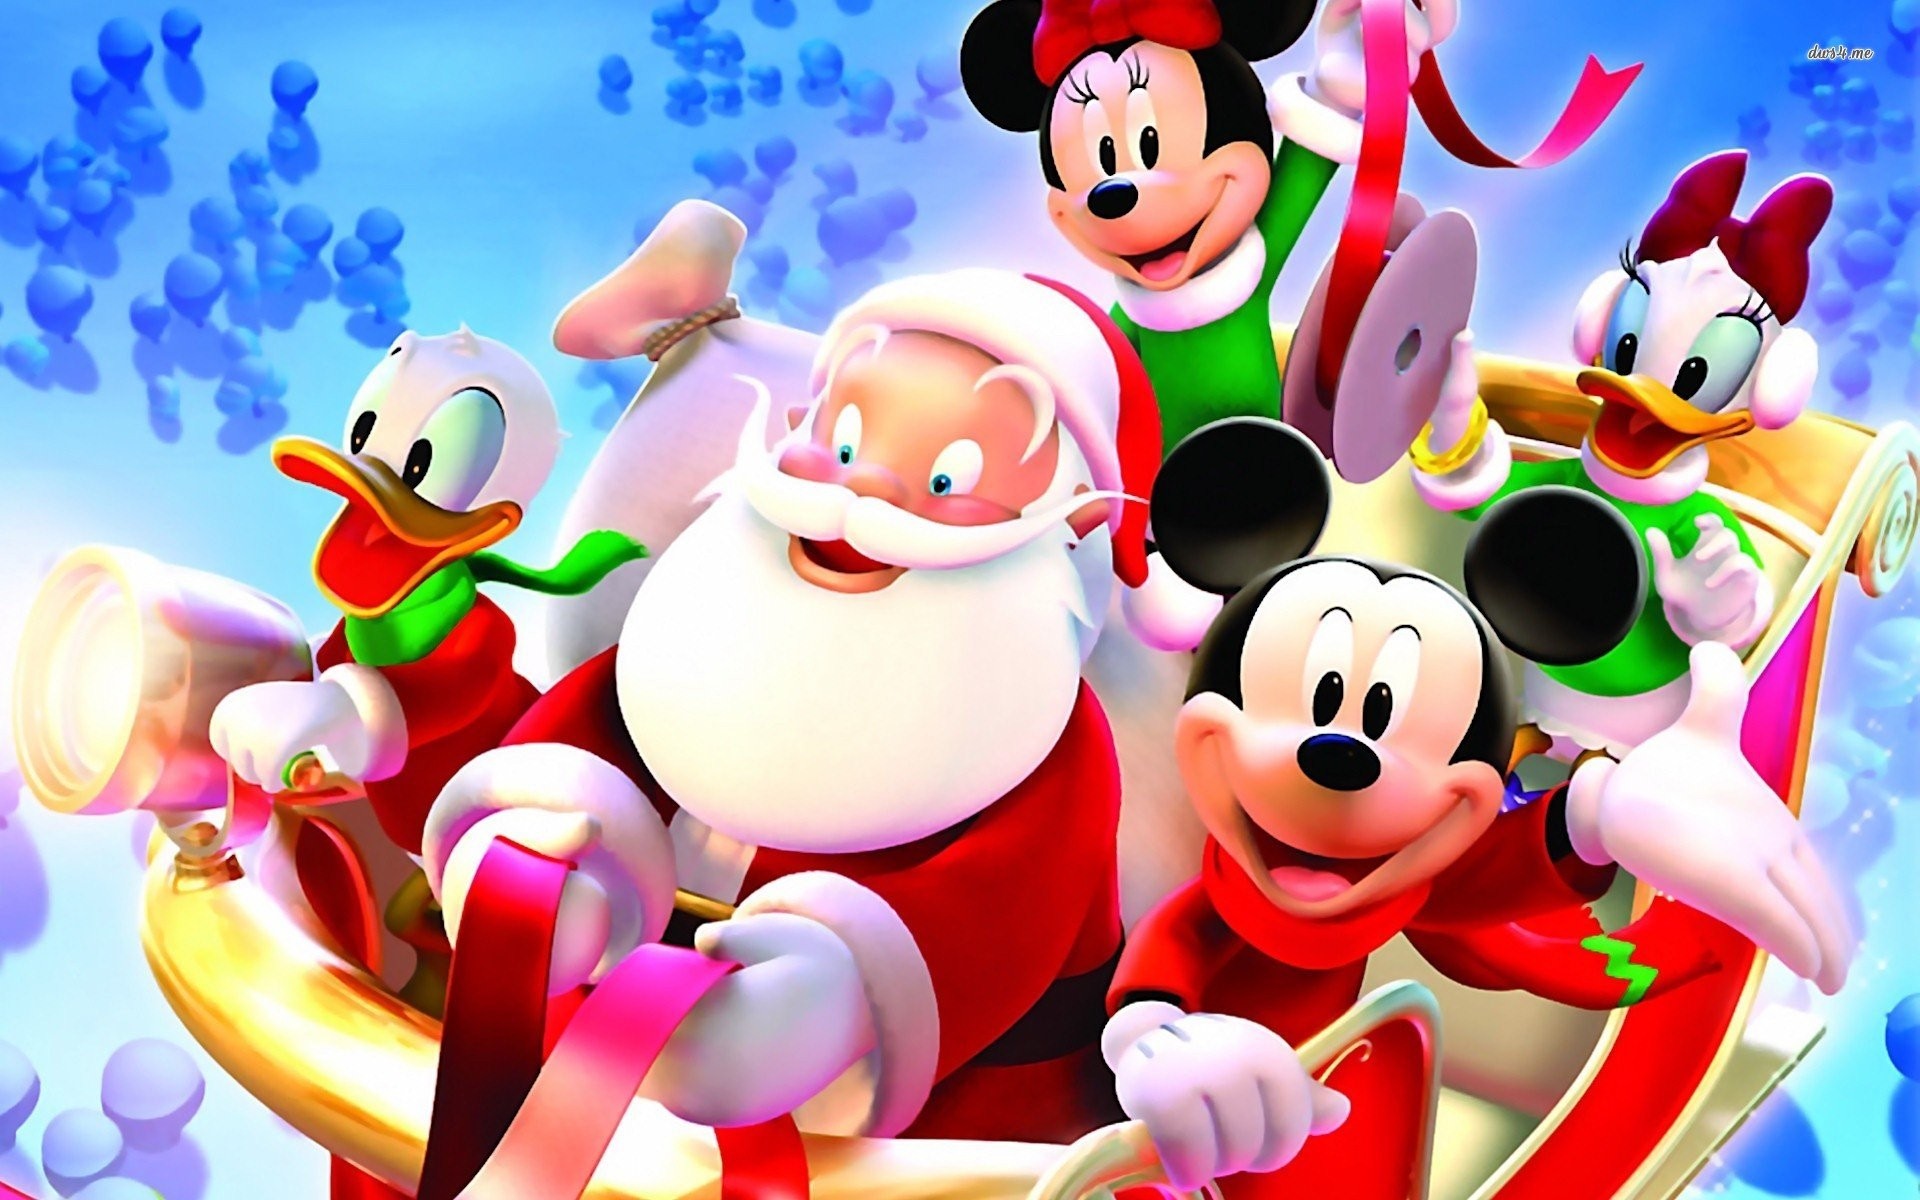 Download These FREE Christmas Disney World Zoom Backgrounds